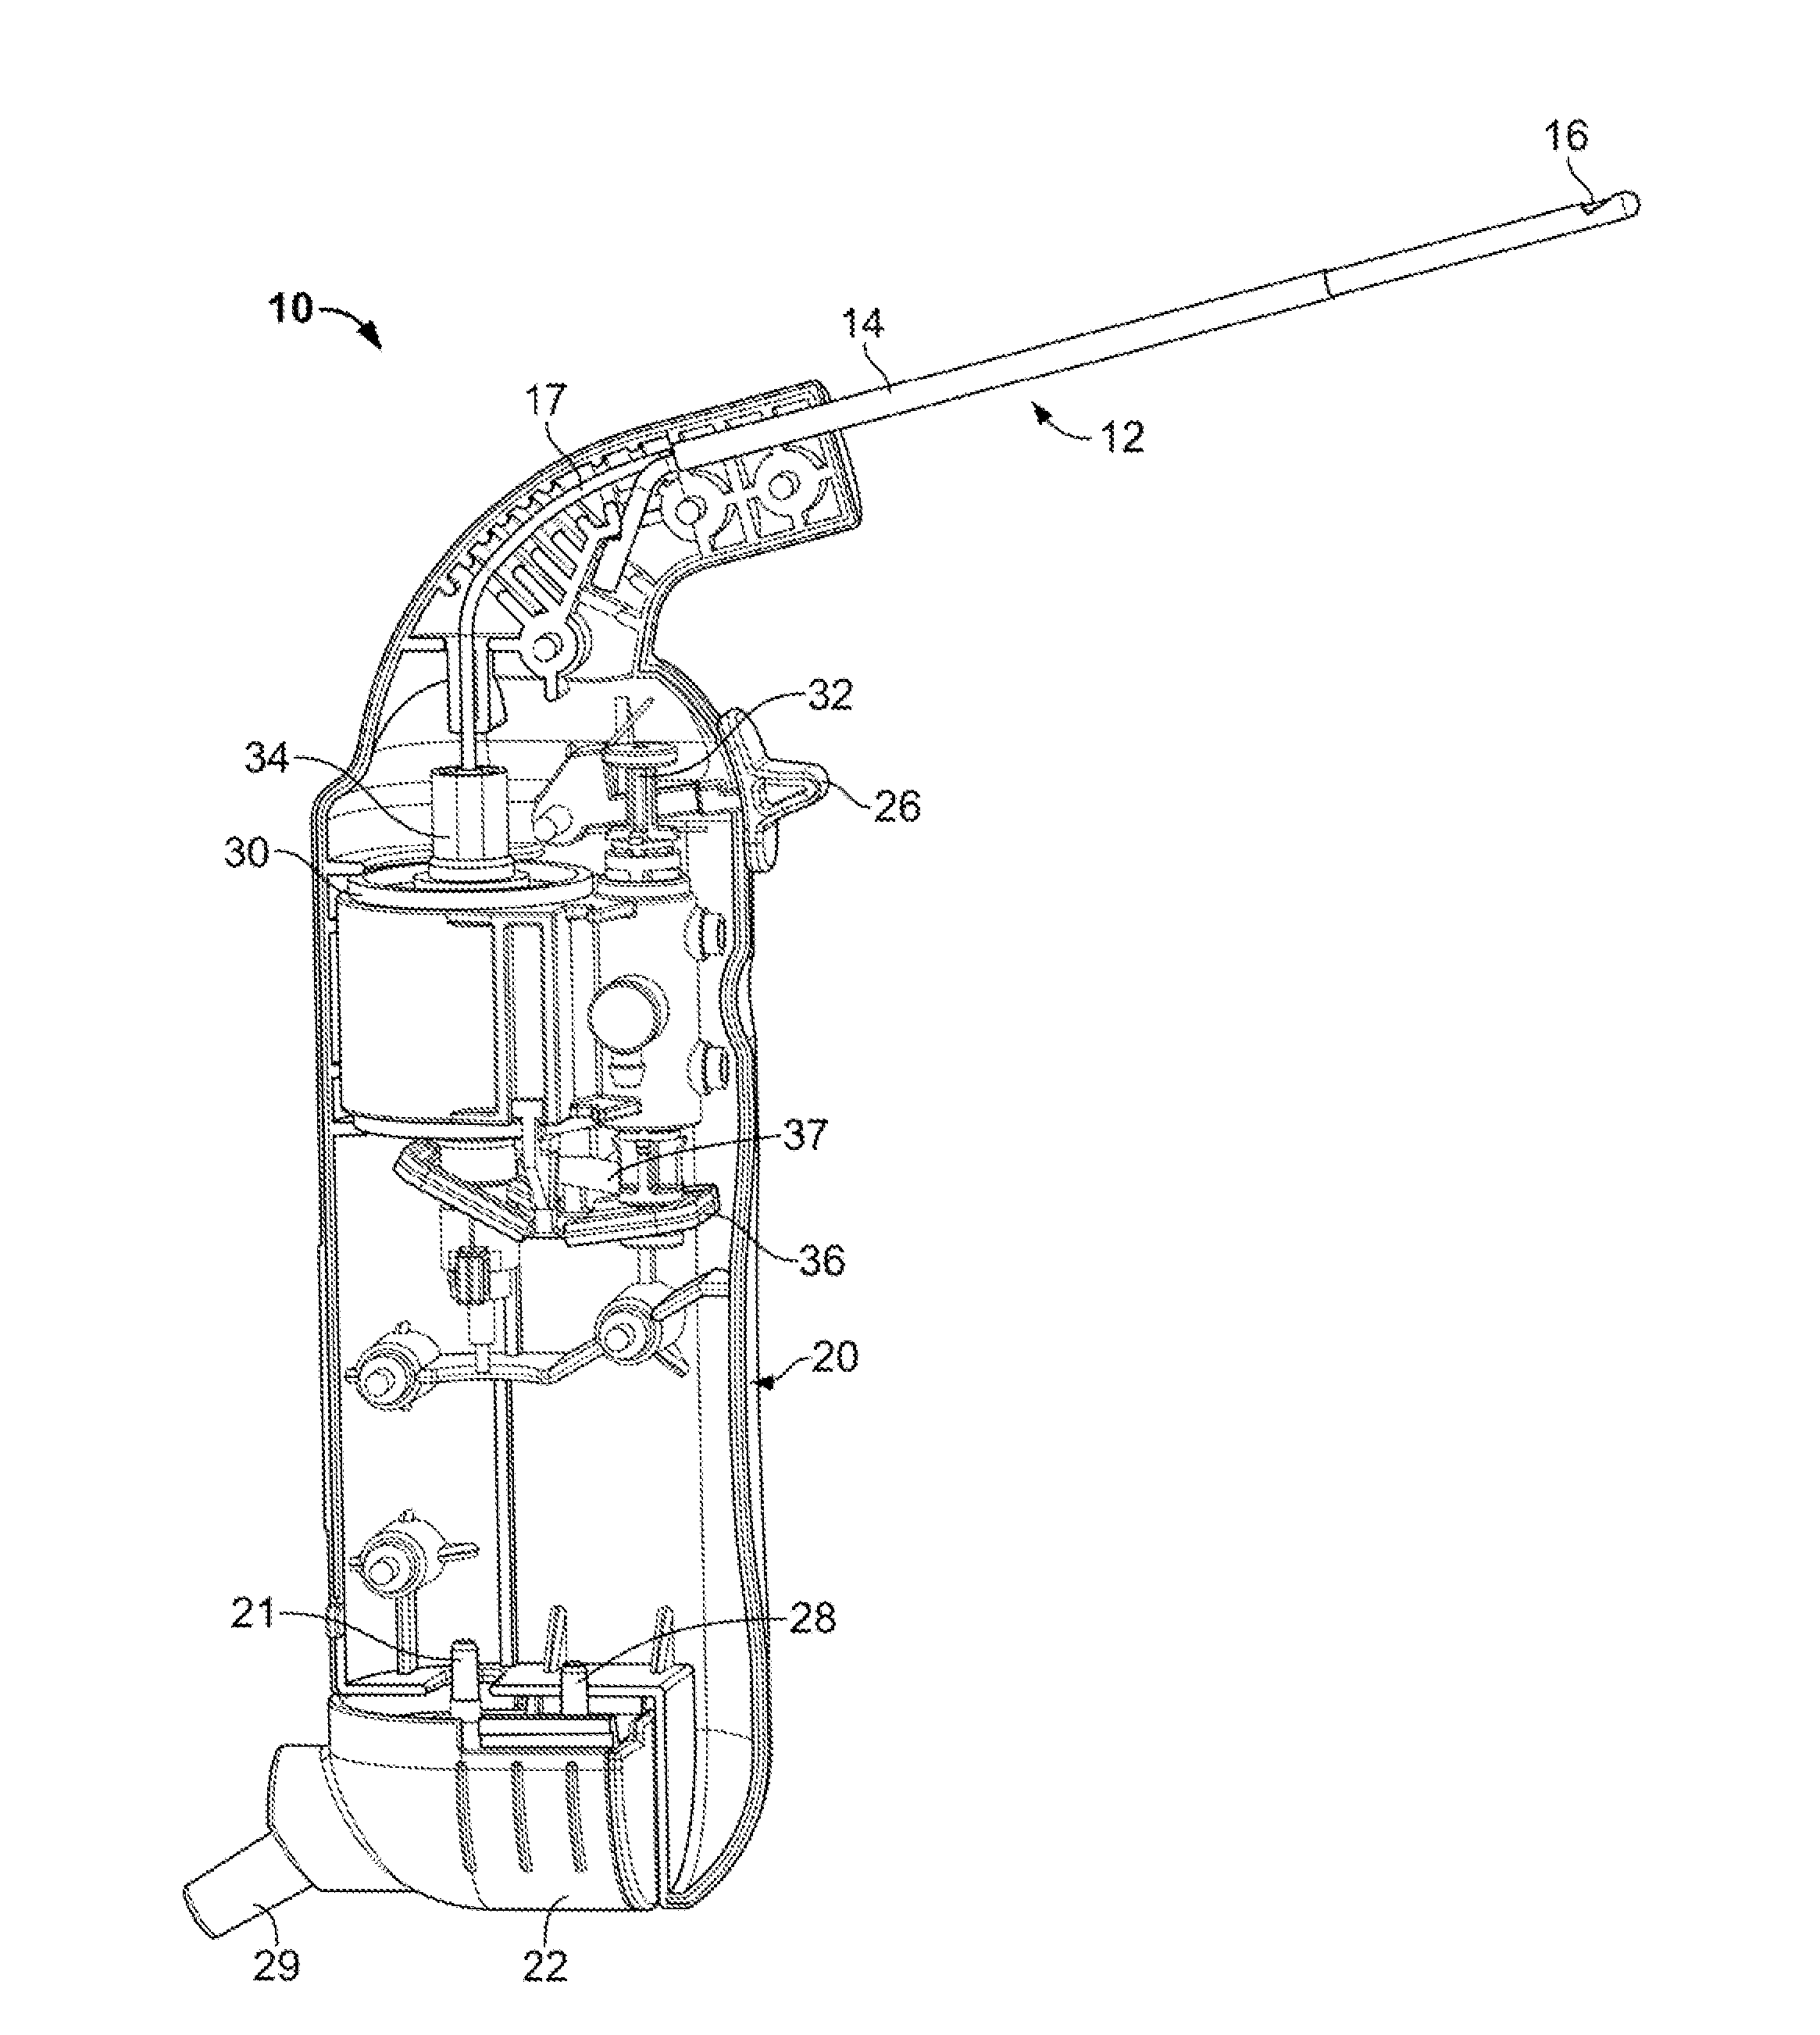 Devices and methods for cutting and evacuating tissue